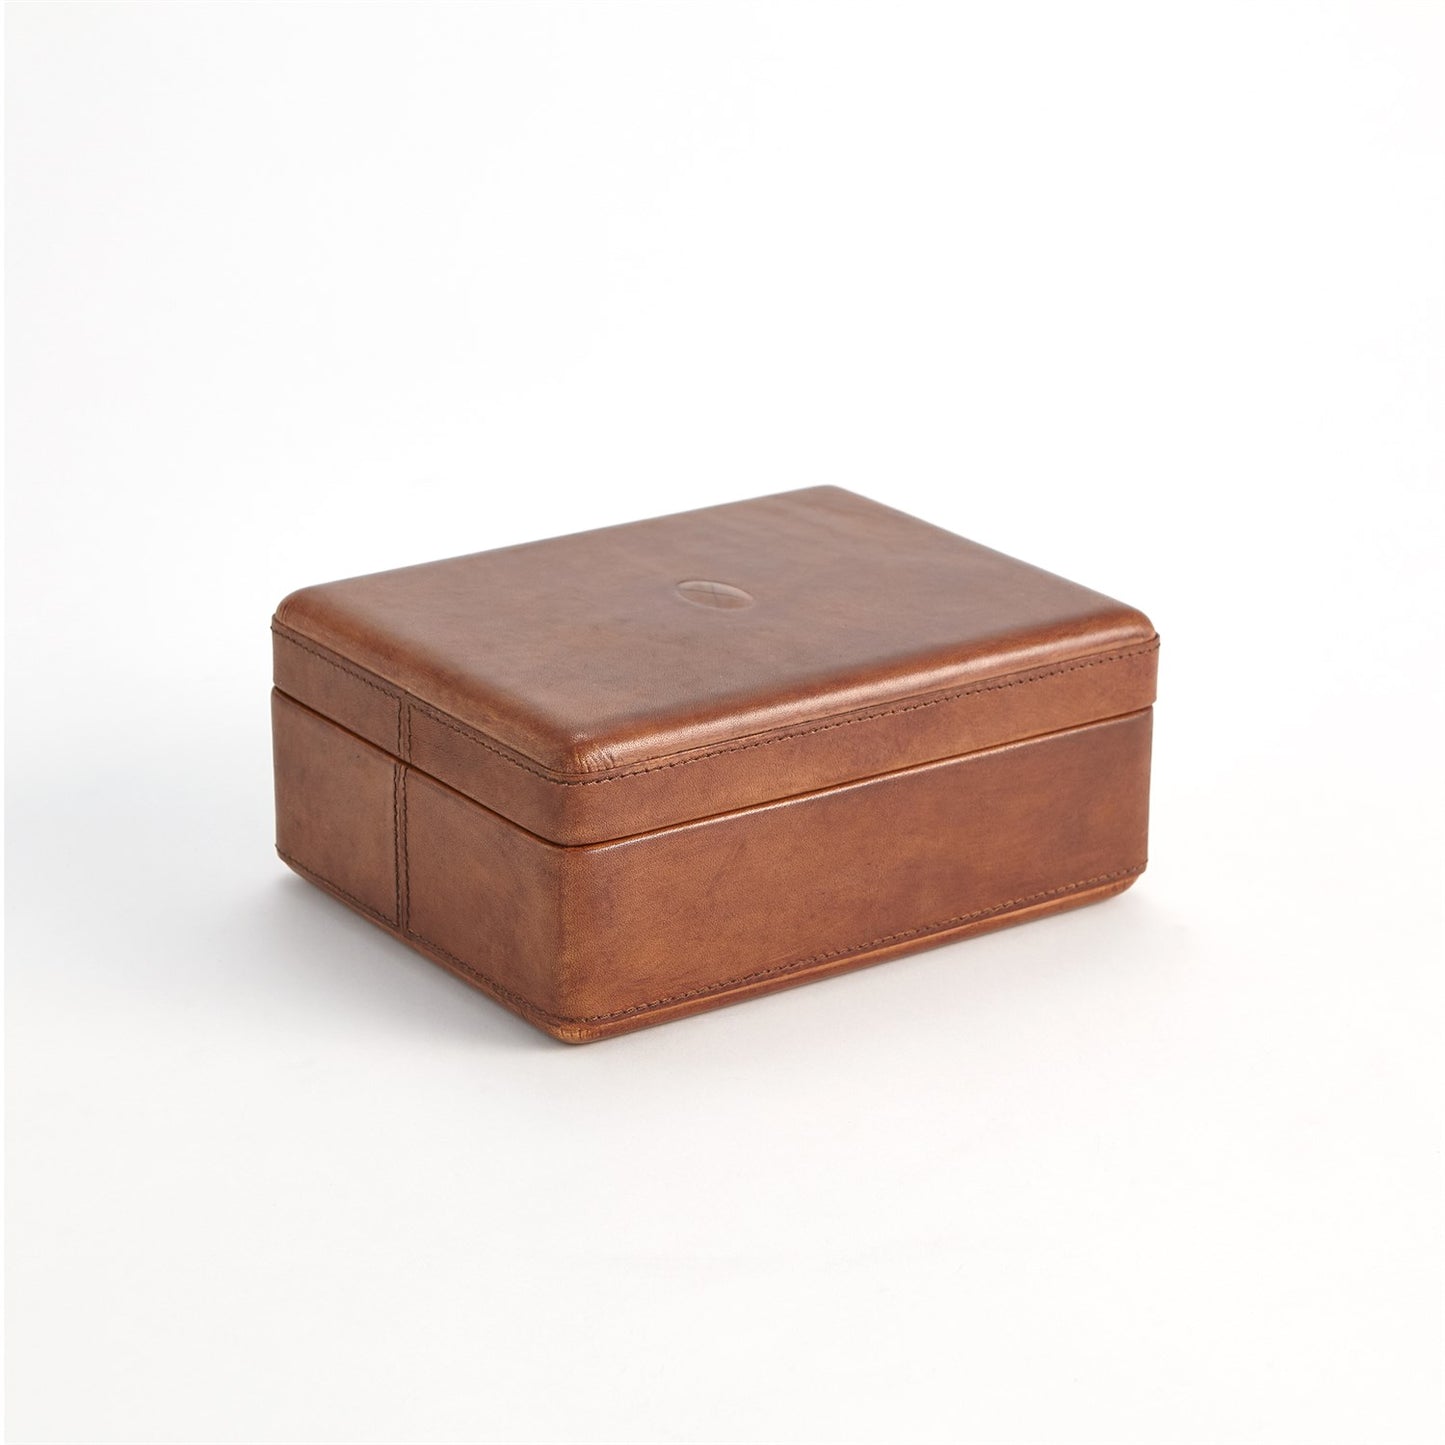 Signature Tobacco Covered Boxes